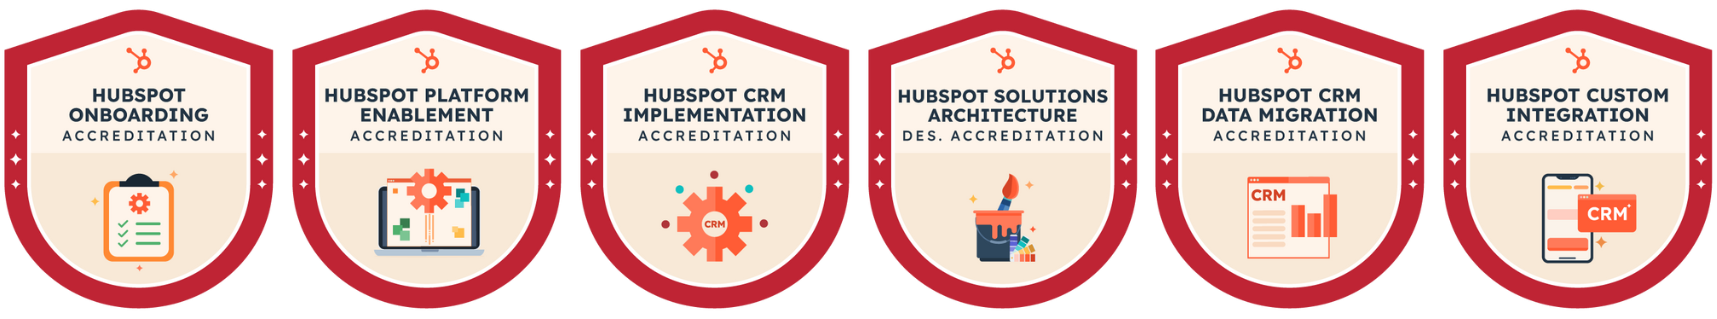 Badges for Earned HubSpot Accreditations